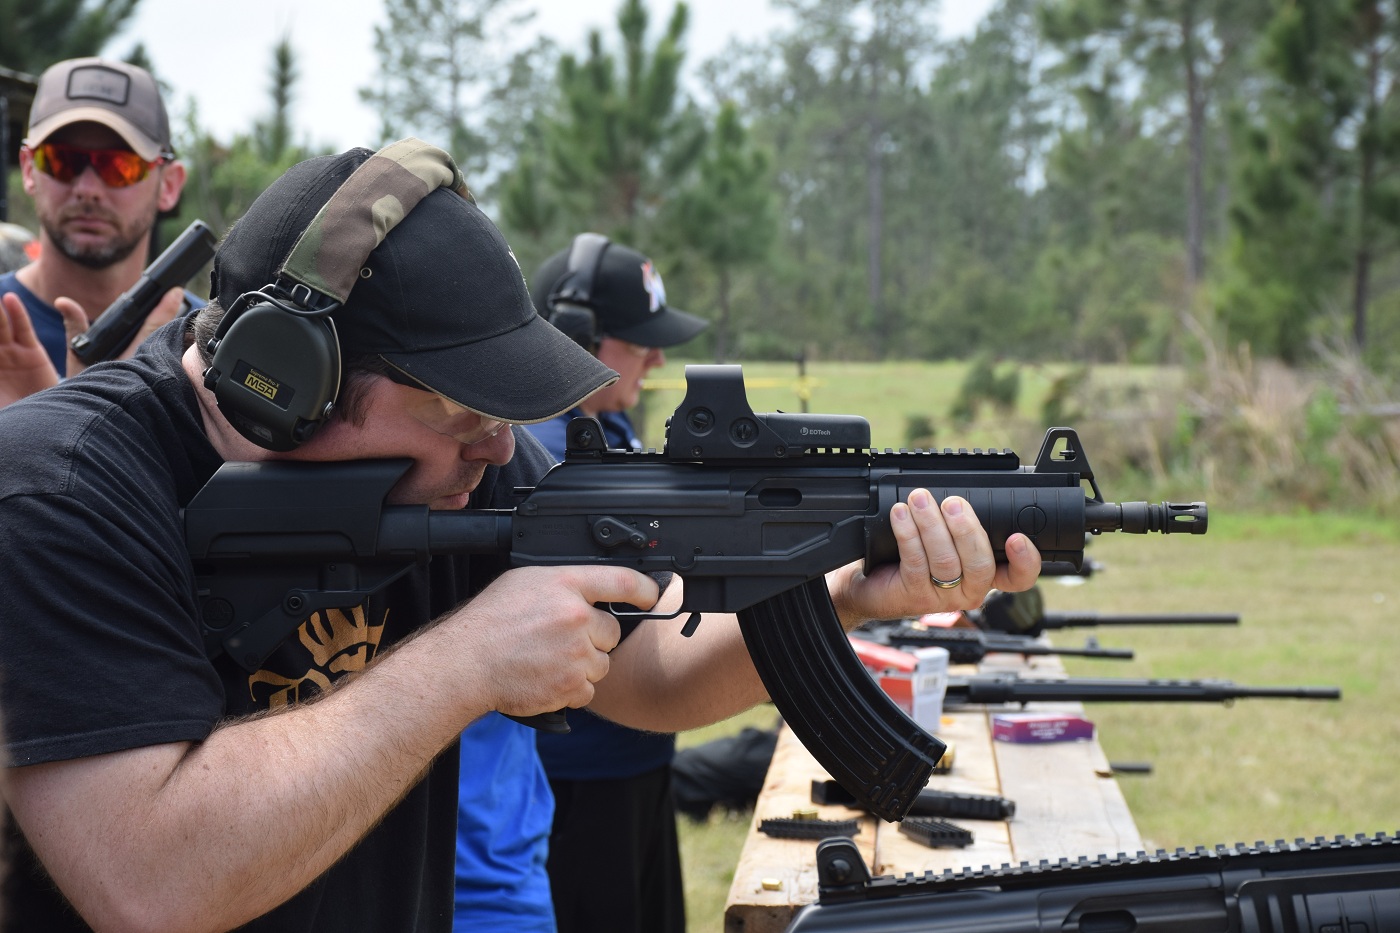 Scot from RS Regulate shoots the SBR version of the Galil ACE in 7.62x39mm....